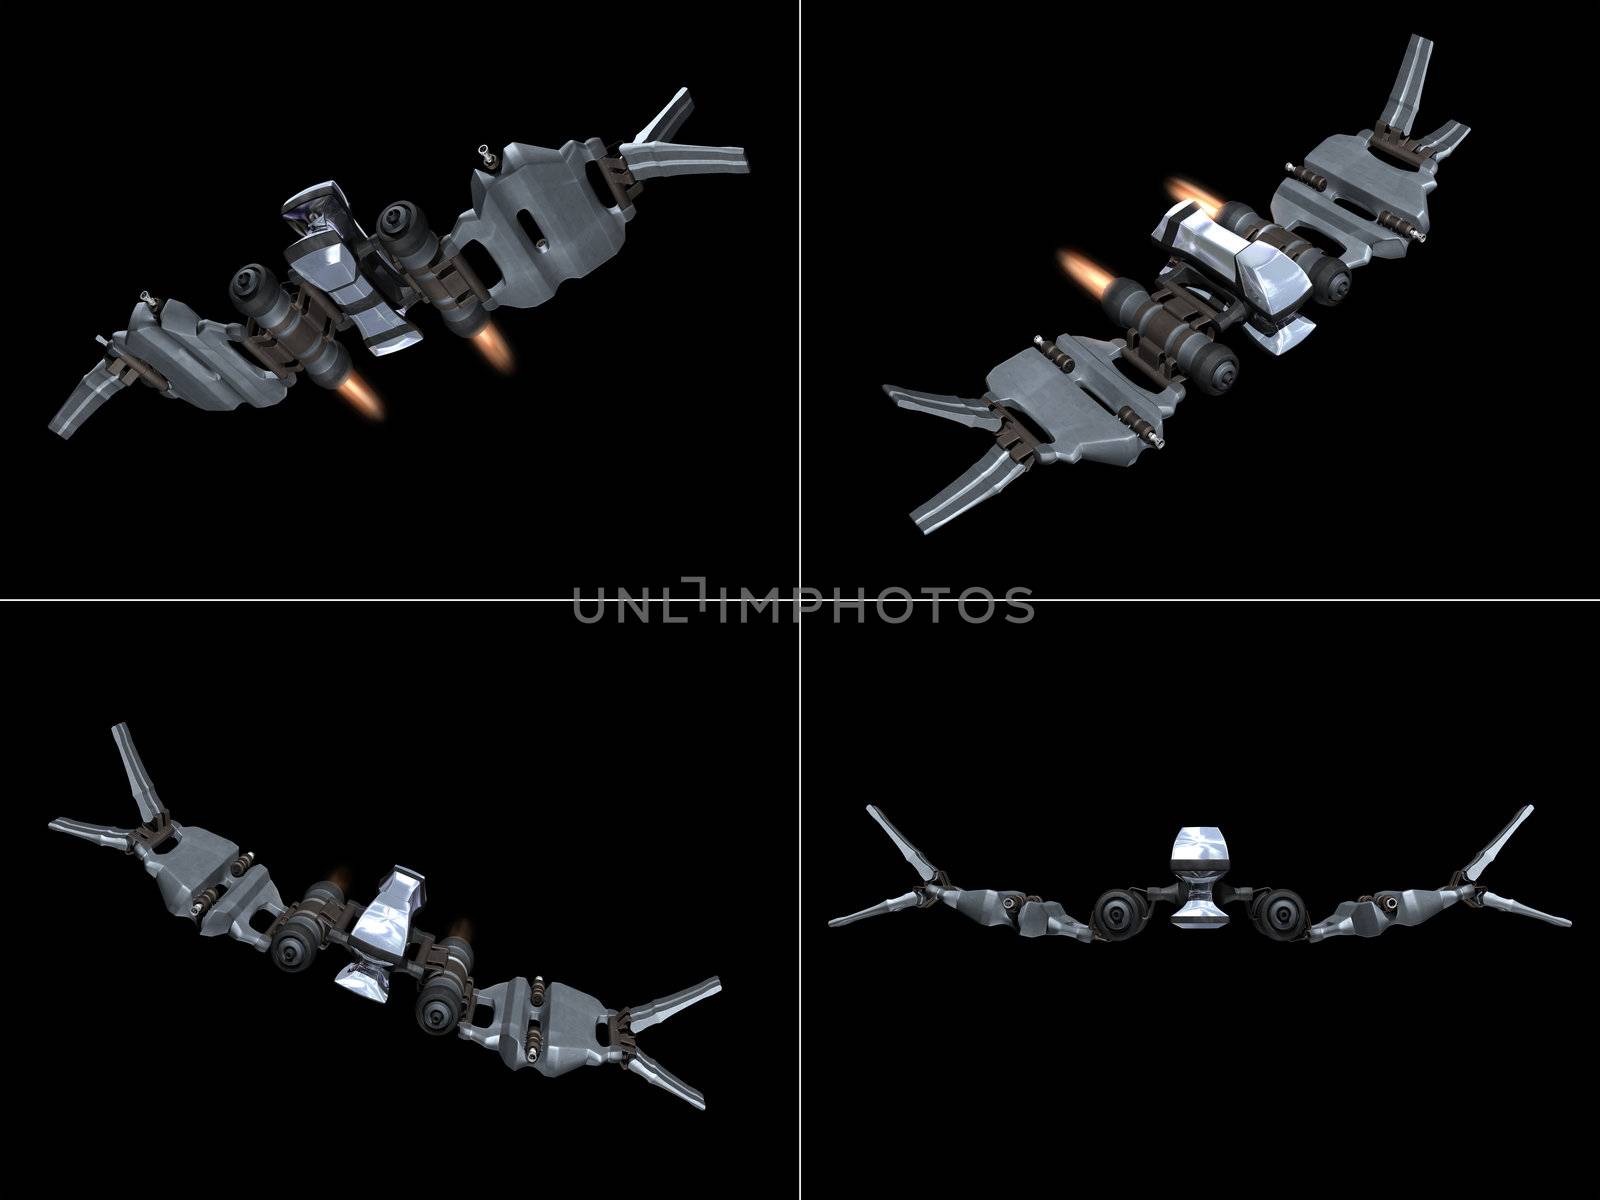 Four front views of a StarFighter in action with a black background